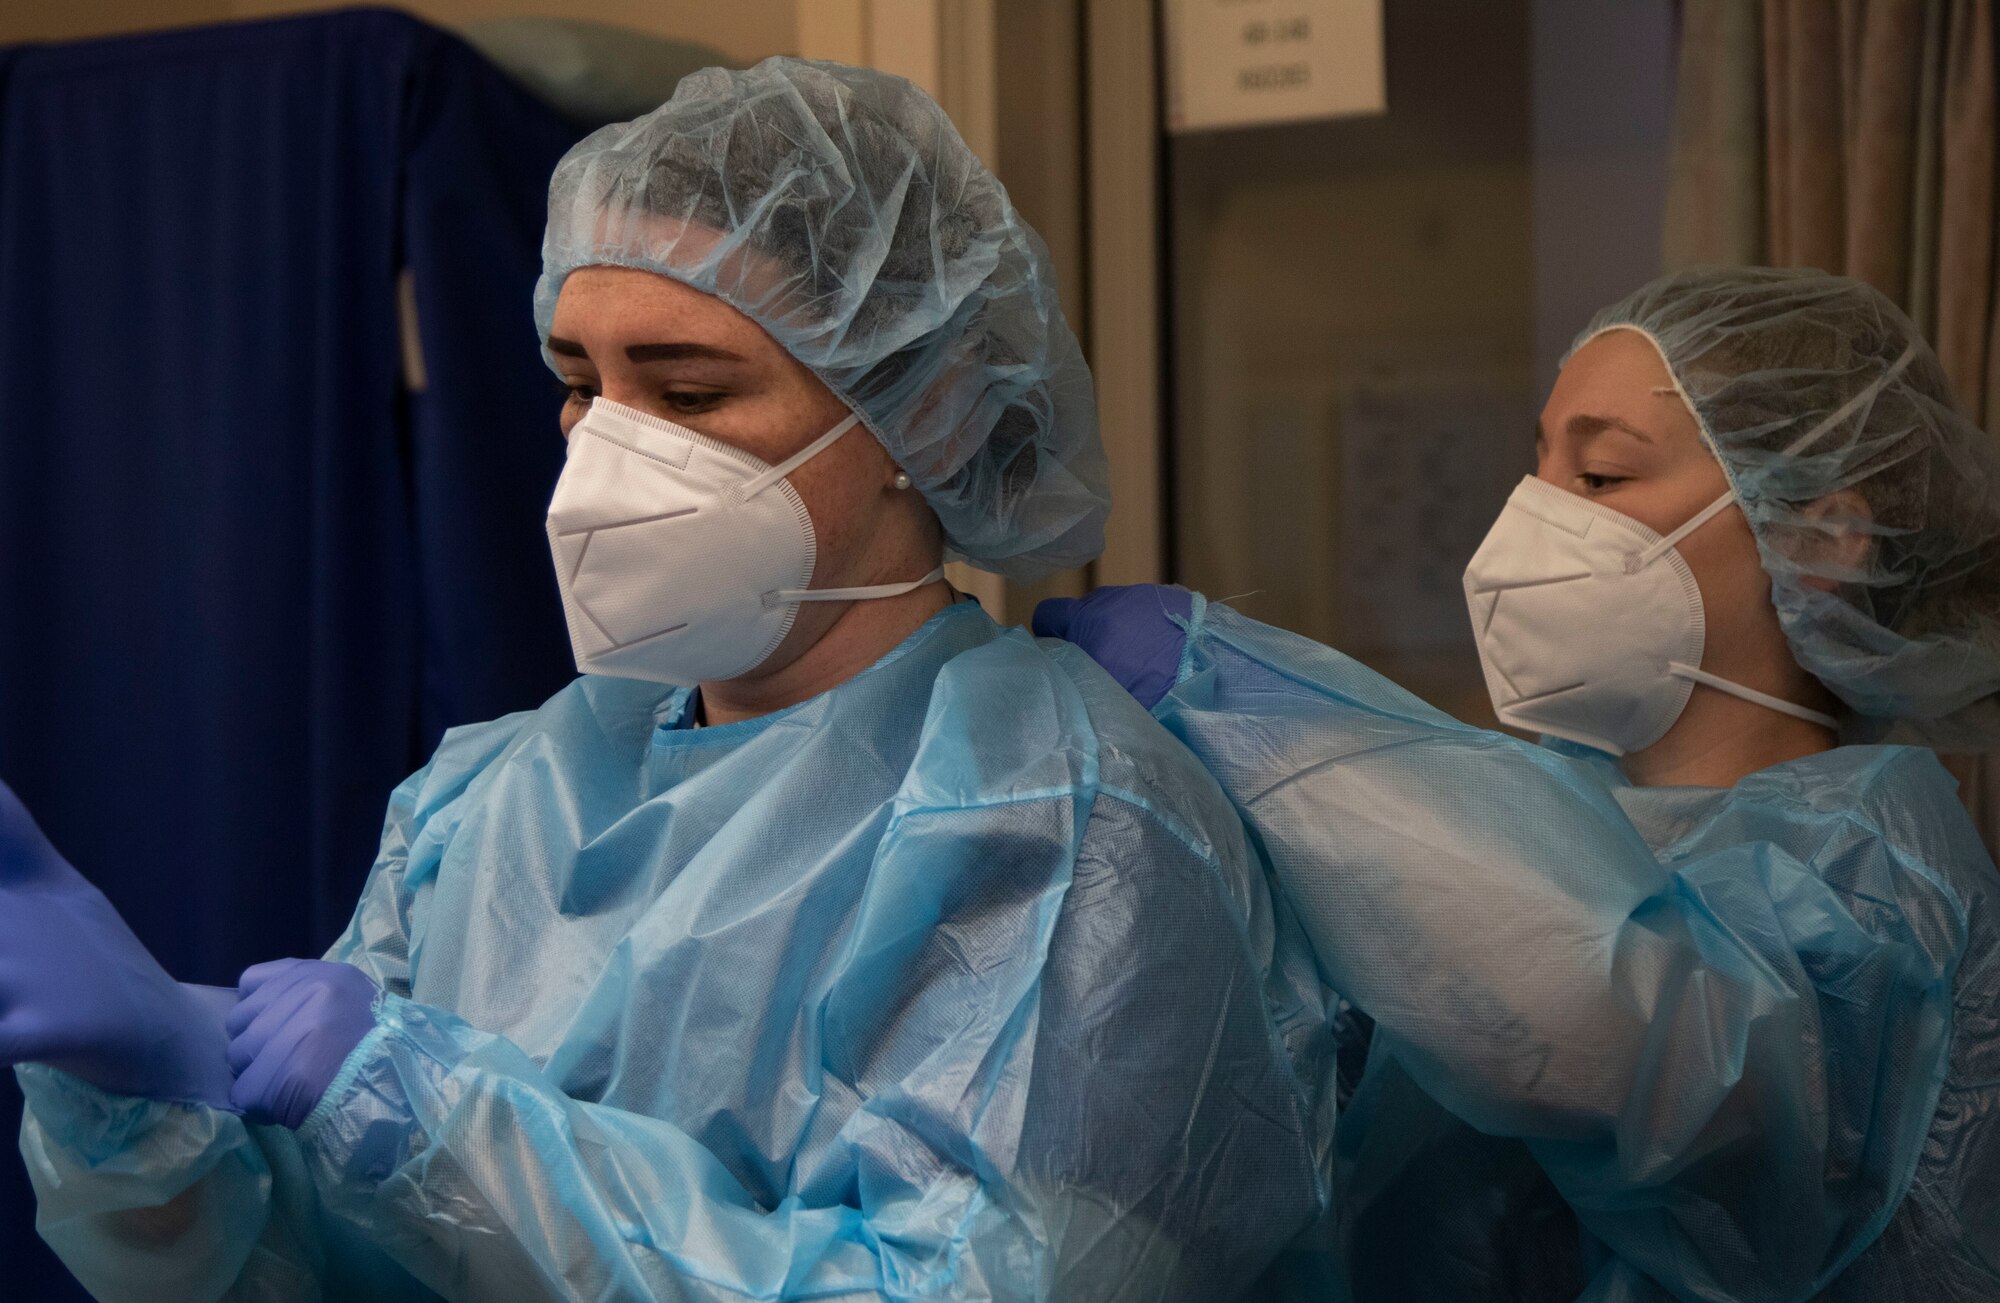 U.S. Air Force Master Sgt. Amanda Orvis, left, and Staff Sgt. Aubrey Woolman with the 99th Medical Group, Nellis Air Force Base, Nev., don personal protective equipment ahead of providing care to COVID-19 positive patients in an intensive care unit at LAC+USC Medical Center in Los Angeles, Calif., Jan. 18, 2021. U.S. Northern Command, through U.S. Army North, remains committed to providing flexible Department of Defense support to the whole-of-America COVID-19 response. (U.S. Army photo by Pfc. Garrison Waites/5th Mobile Public Affairs Detachment)